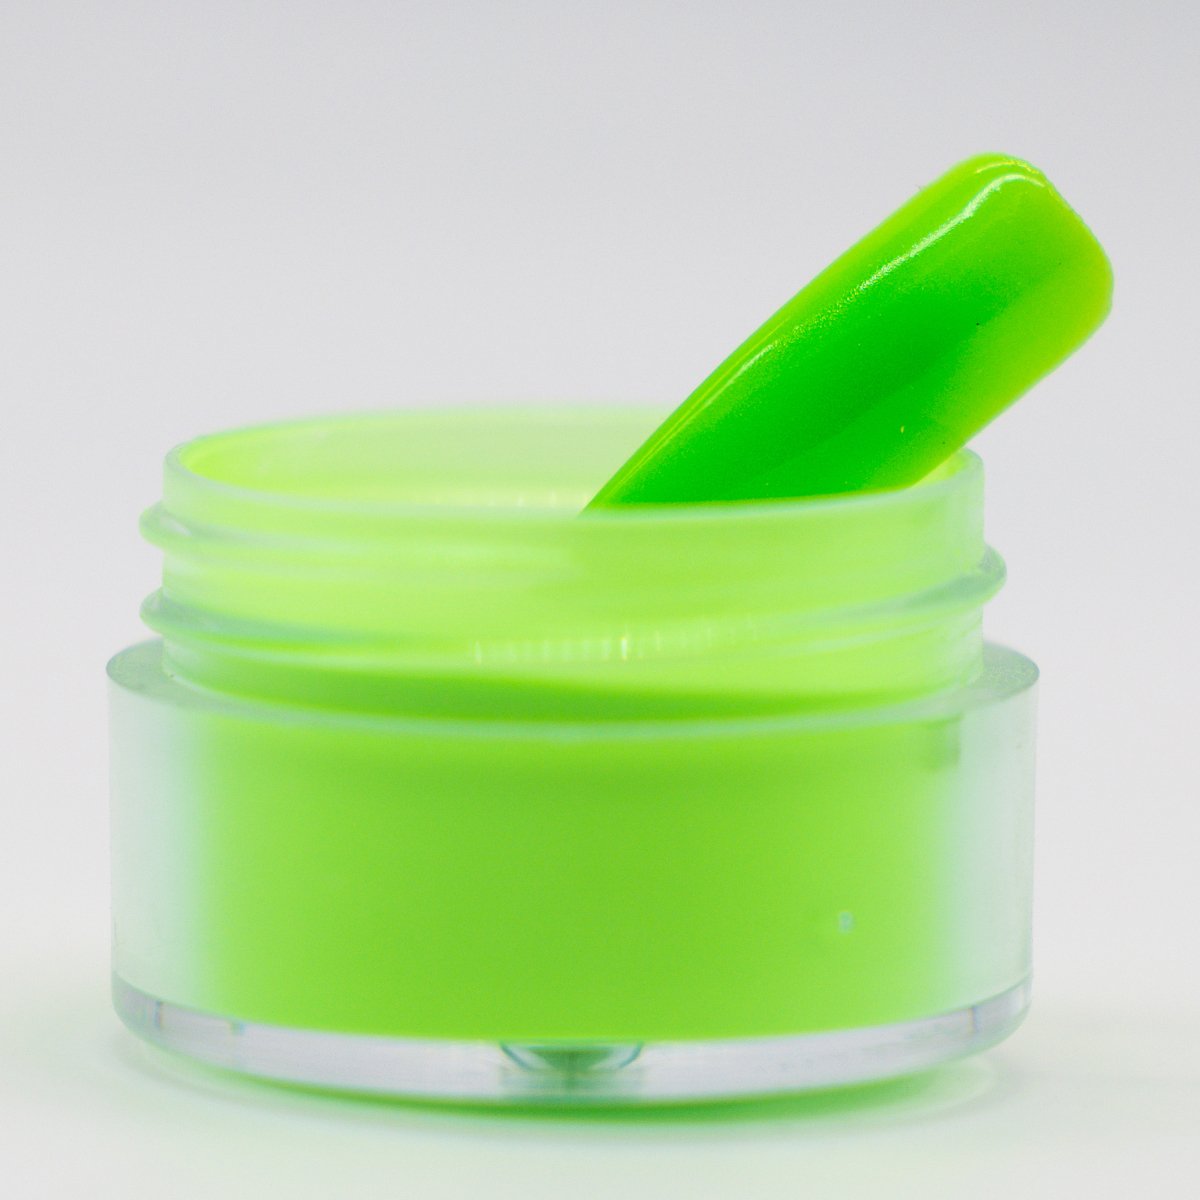 VALENTINO COLORED POWDER - 183 LIMELIGHT (GLOW)